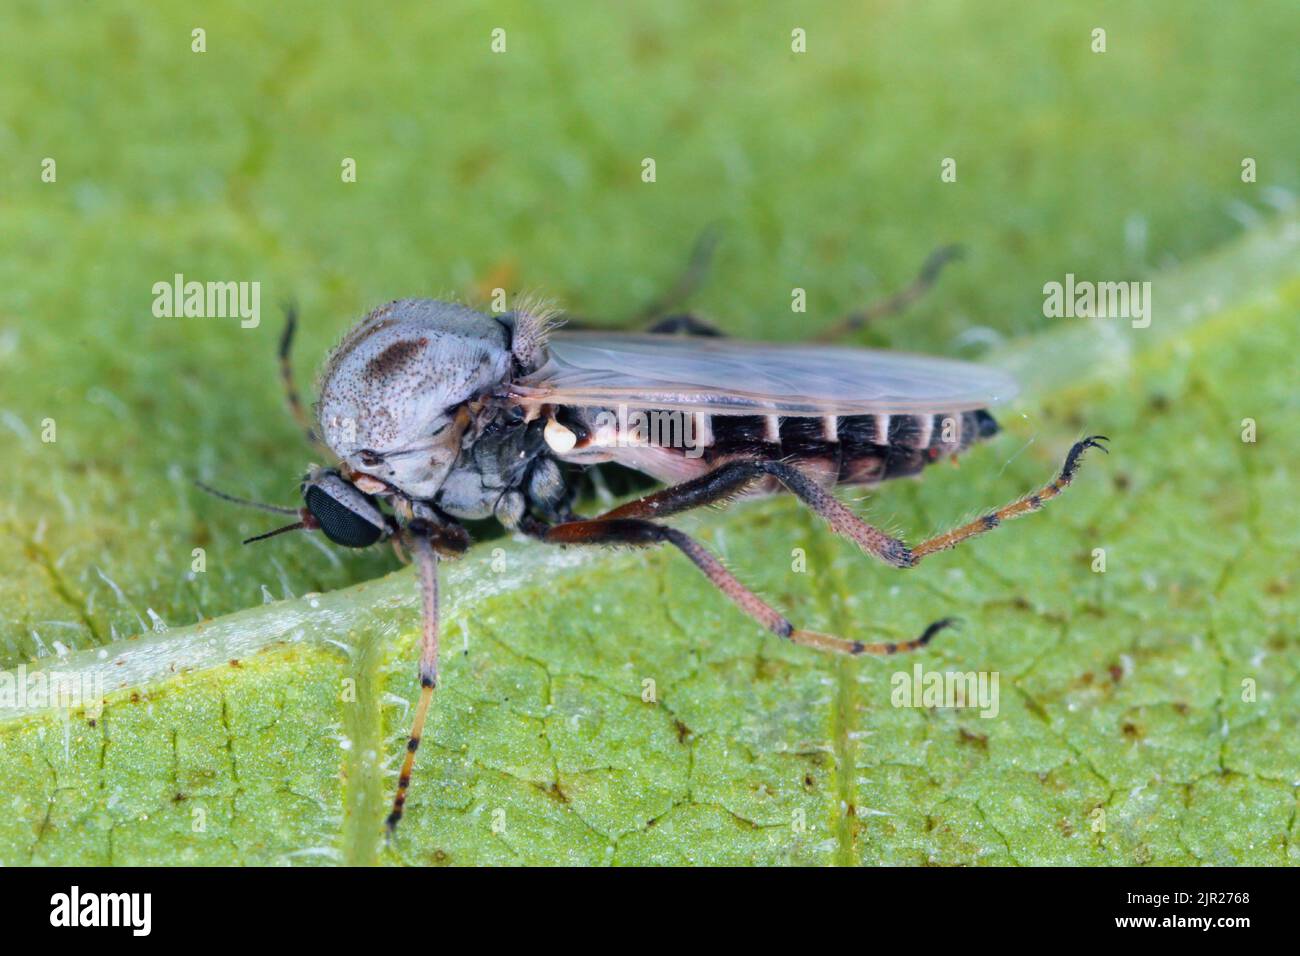 Female of flie from family Chironomidae (informally known as chironomids, nonbiting midges, or lake flies). Stock Photo